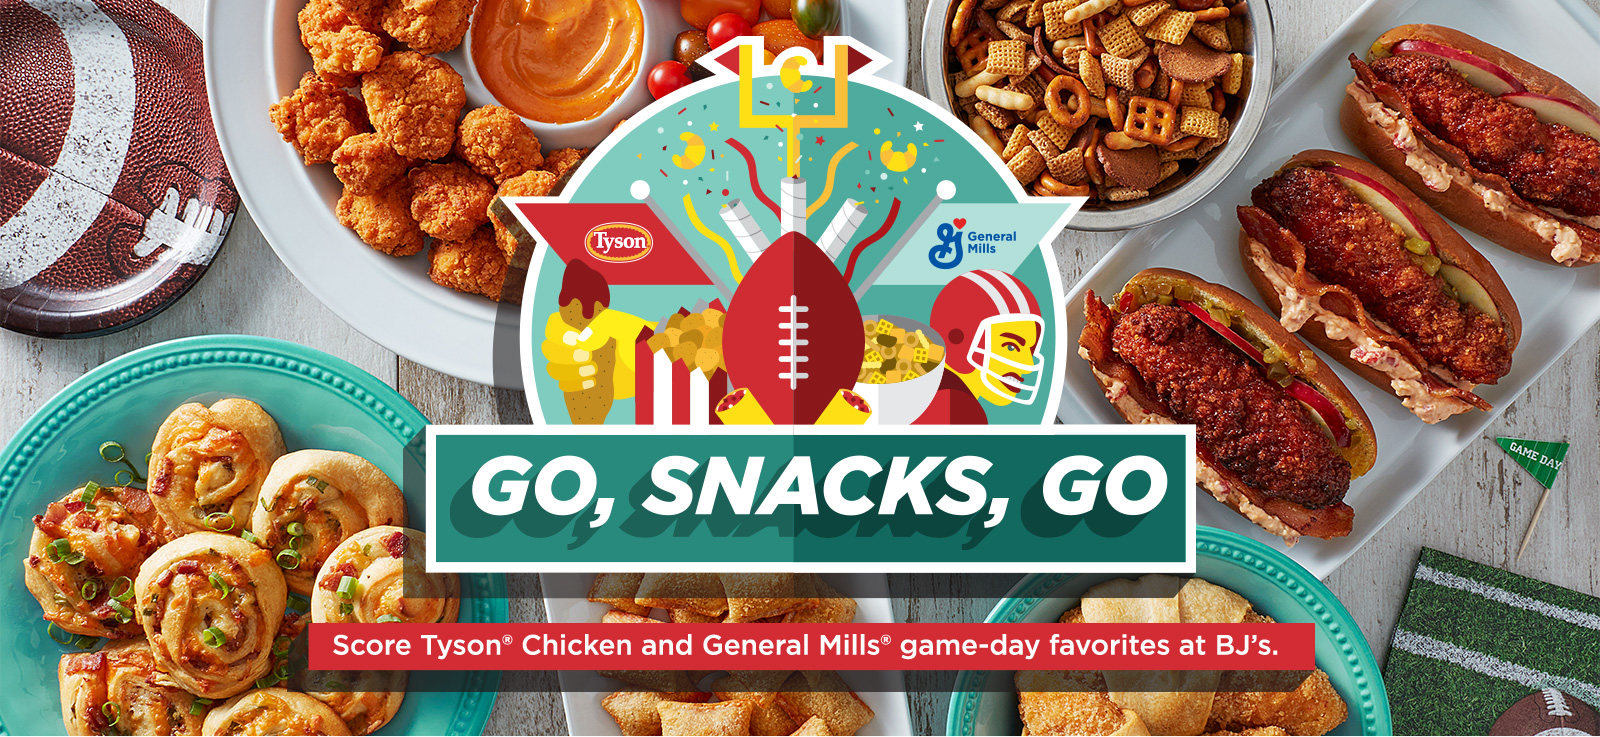 Go, Snacks, Go - Score Tyson® Chicken and General Mills® game-day favorites at BJ's